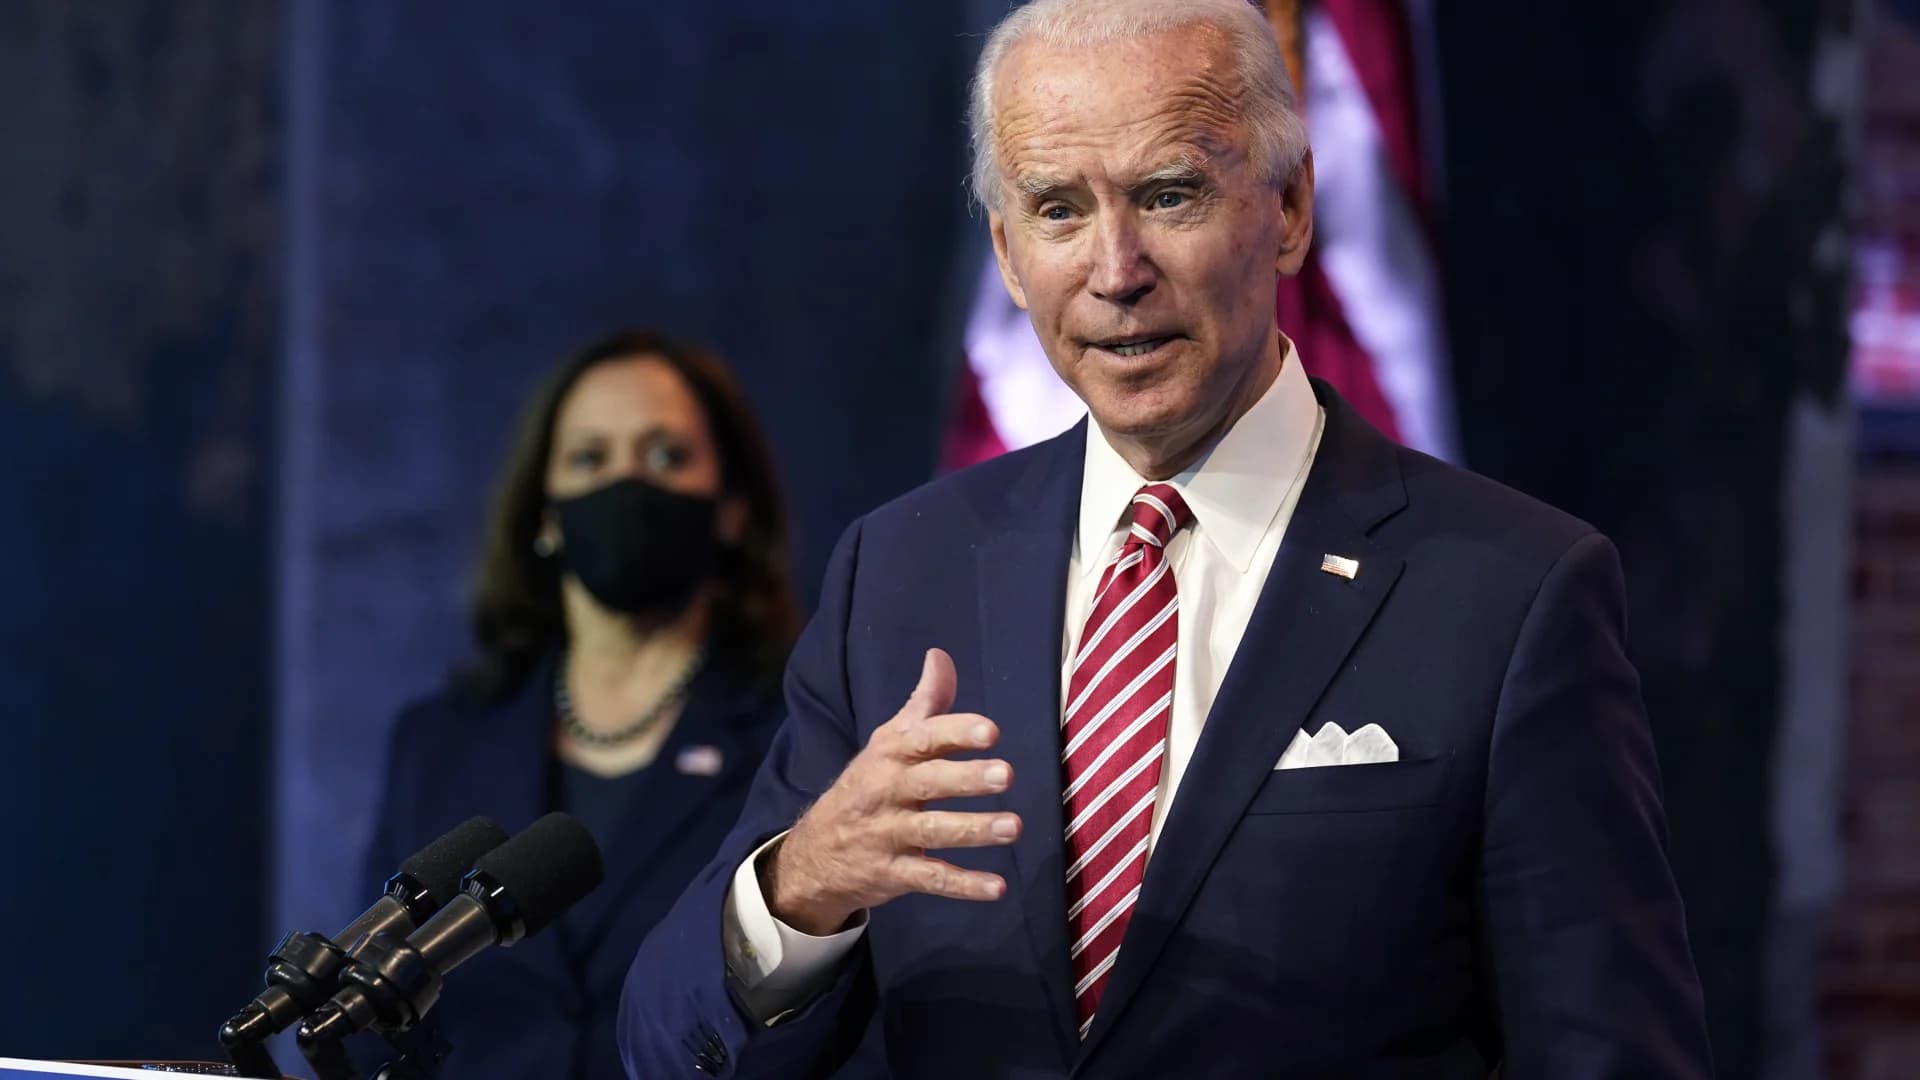 Biden outlines plan to ease economic inequity amid pandemic